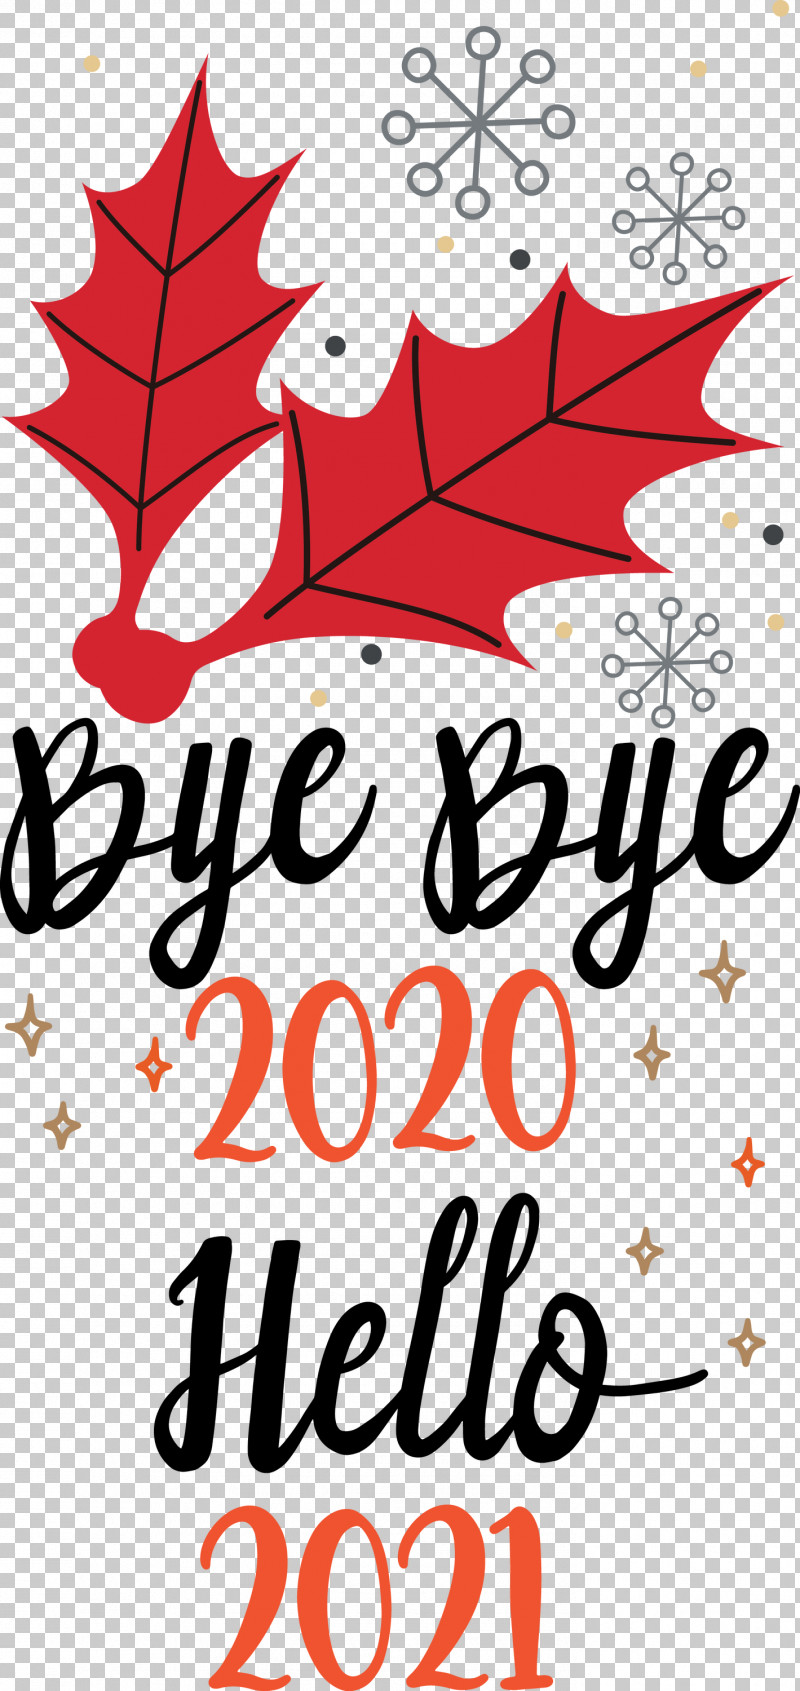 Hello 2021 Year Bye Bye 2020 Year PNG, Clipart, Abstract Art, Animation, Bye Bye 2020 Year, Christmas Day, Drawing Free PNG Download